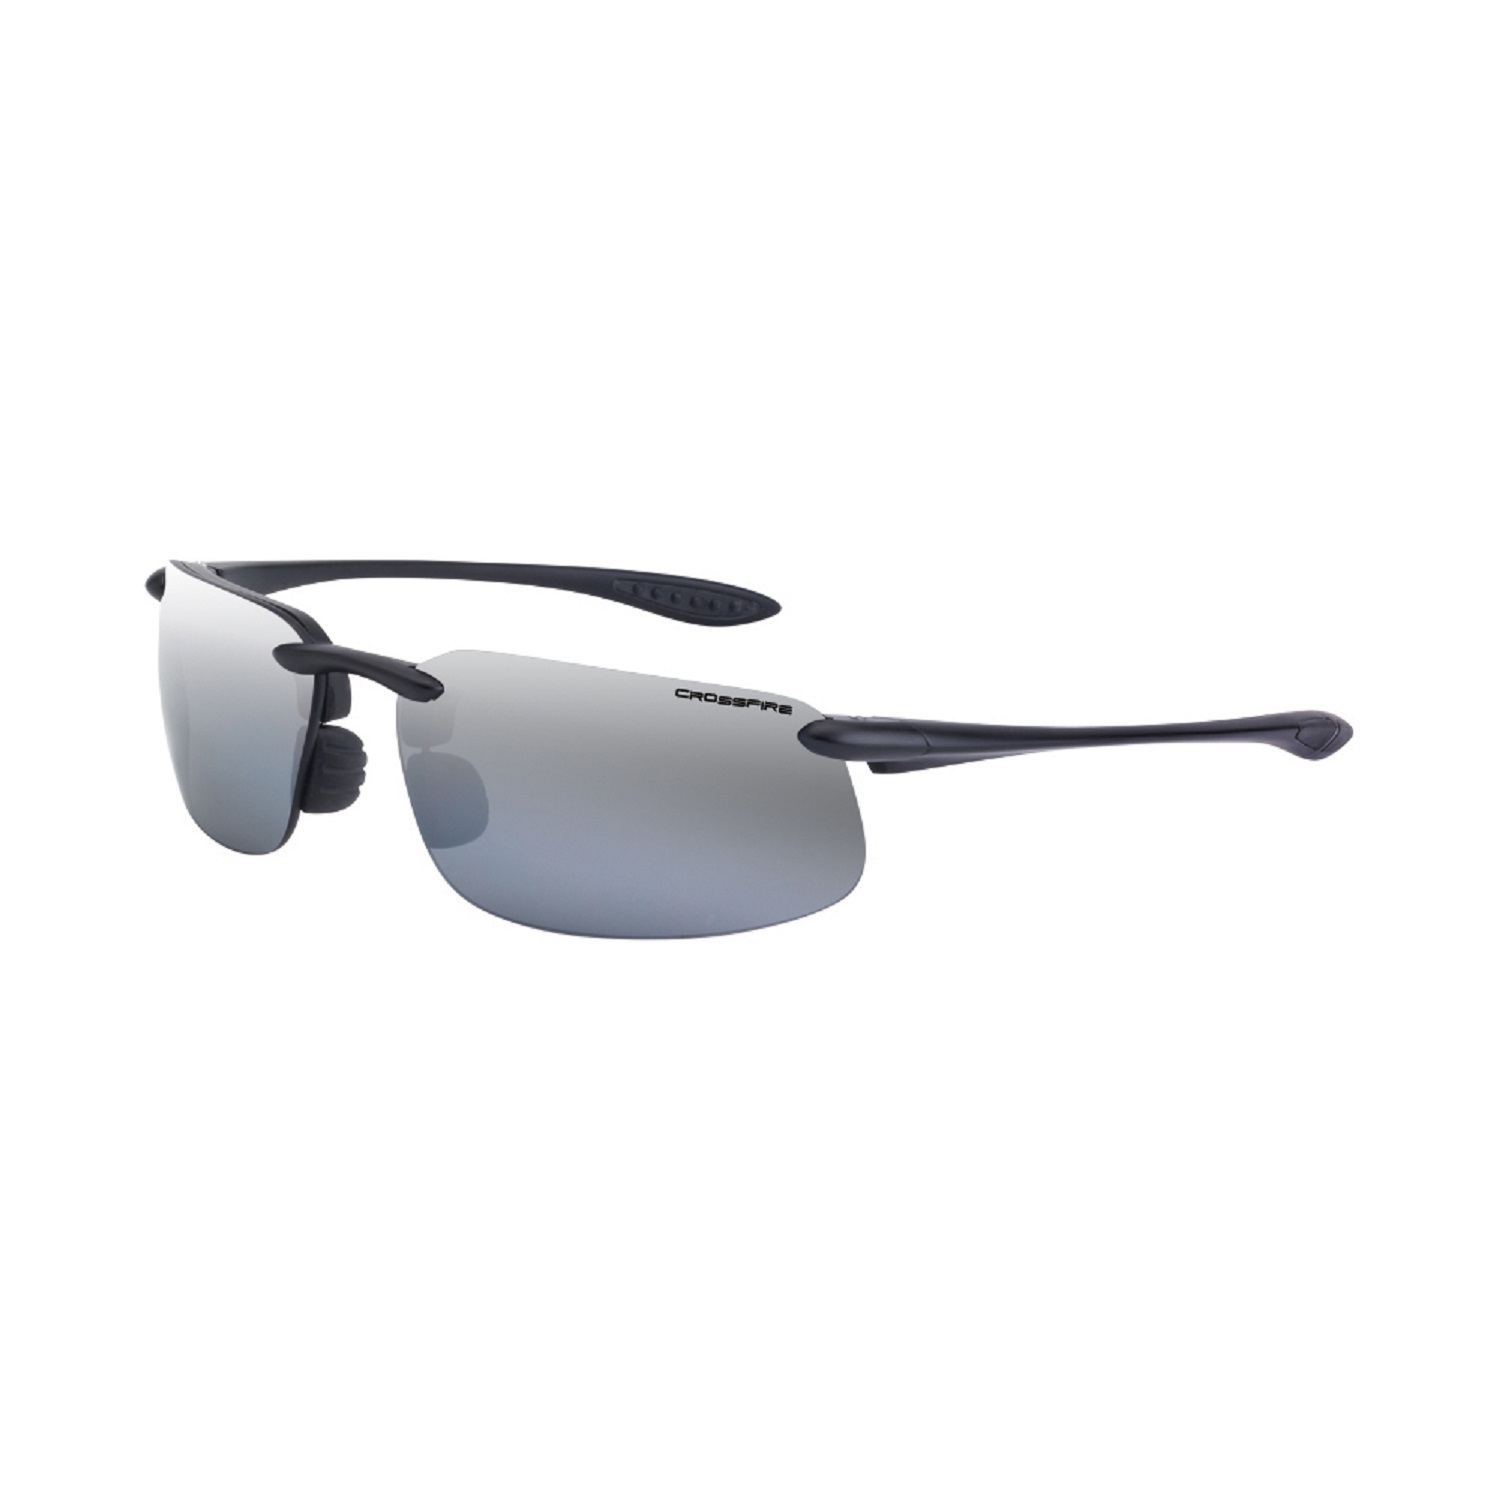 Solitude Crystal Black Frame with Silver Mirror Polarized Lens - image 1 of 2